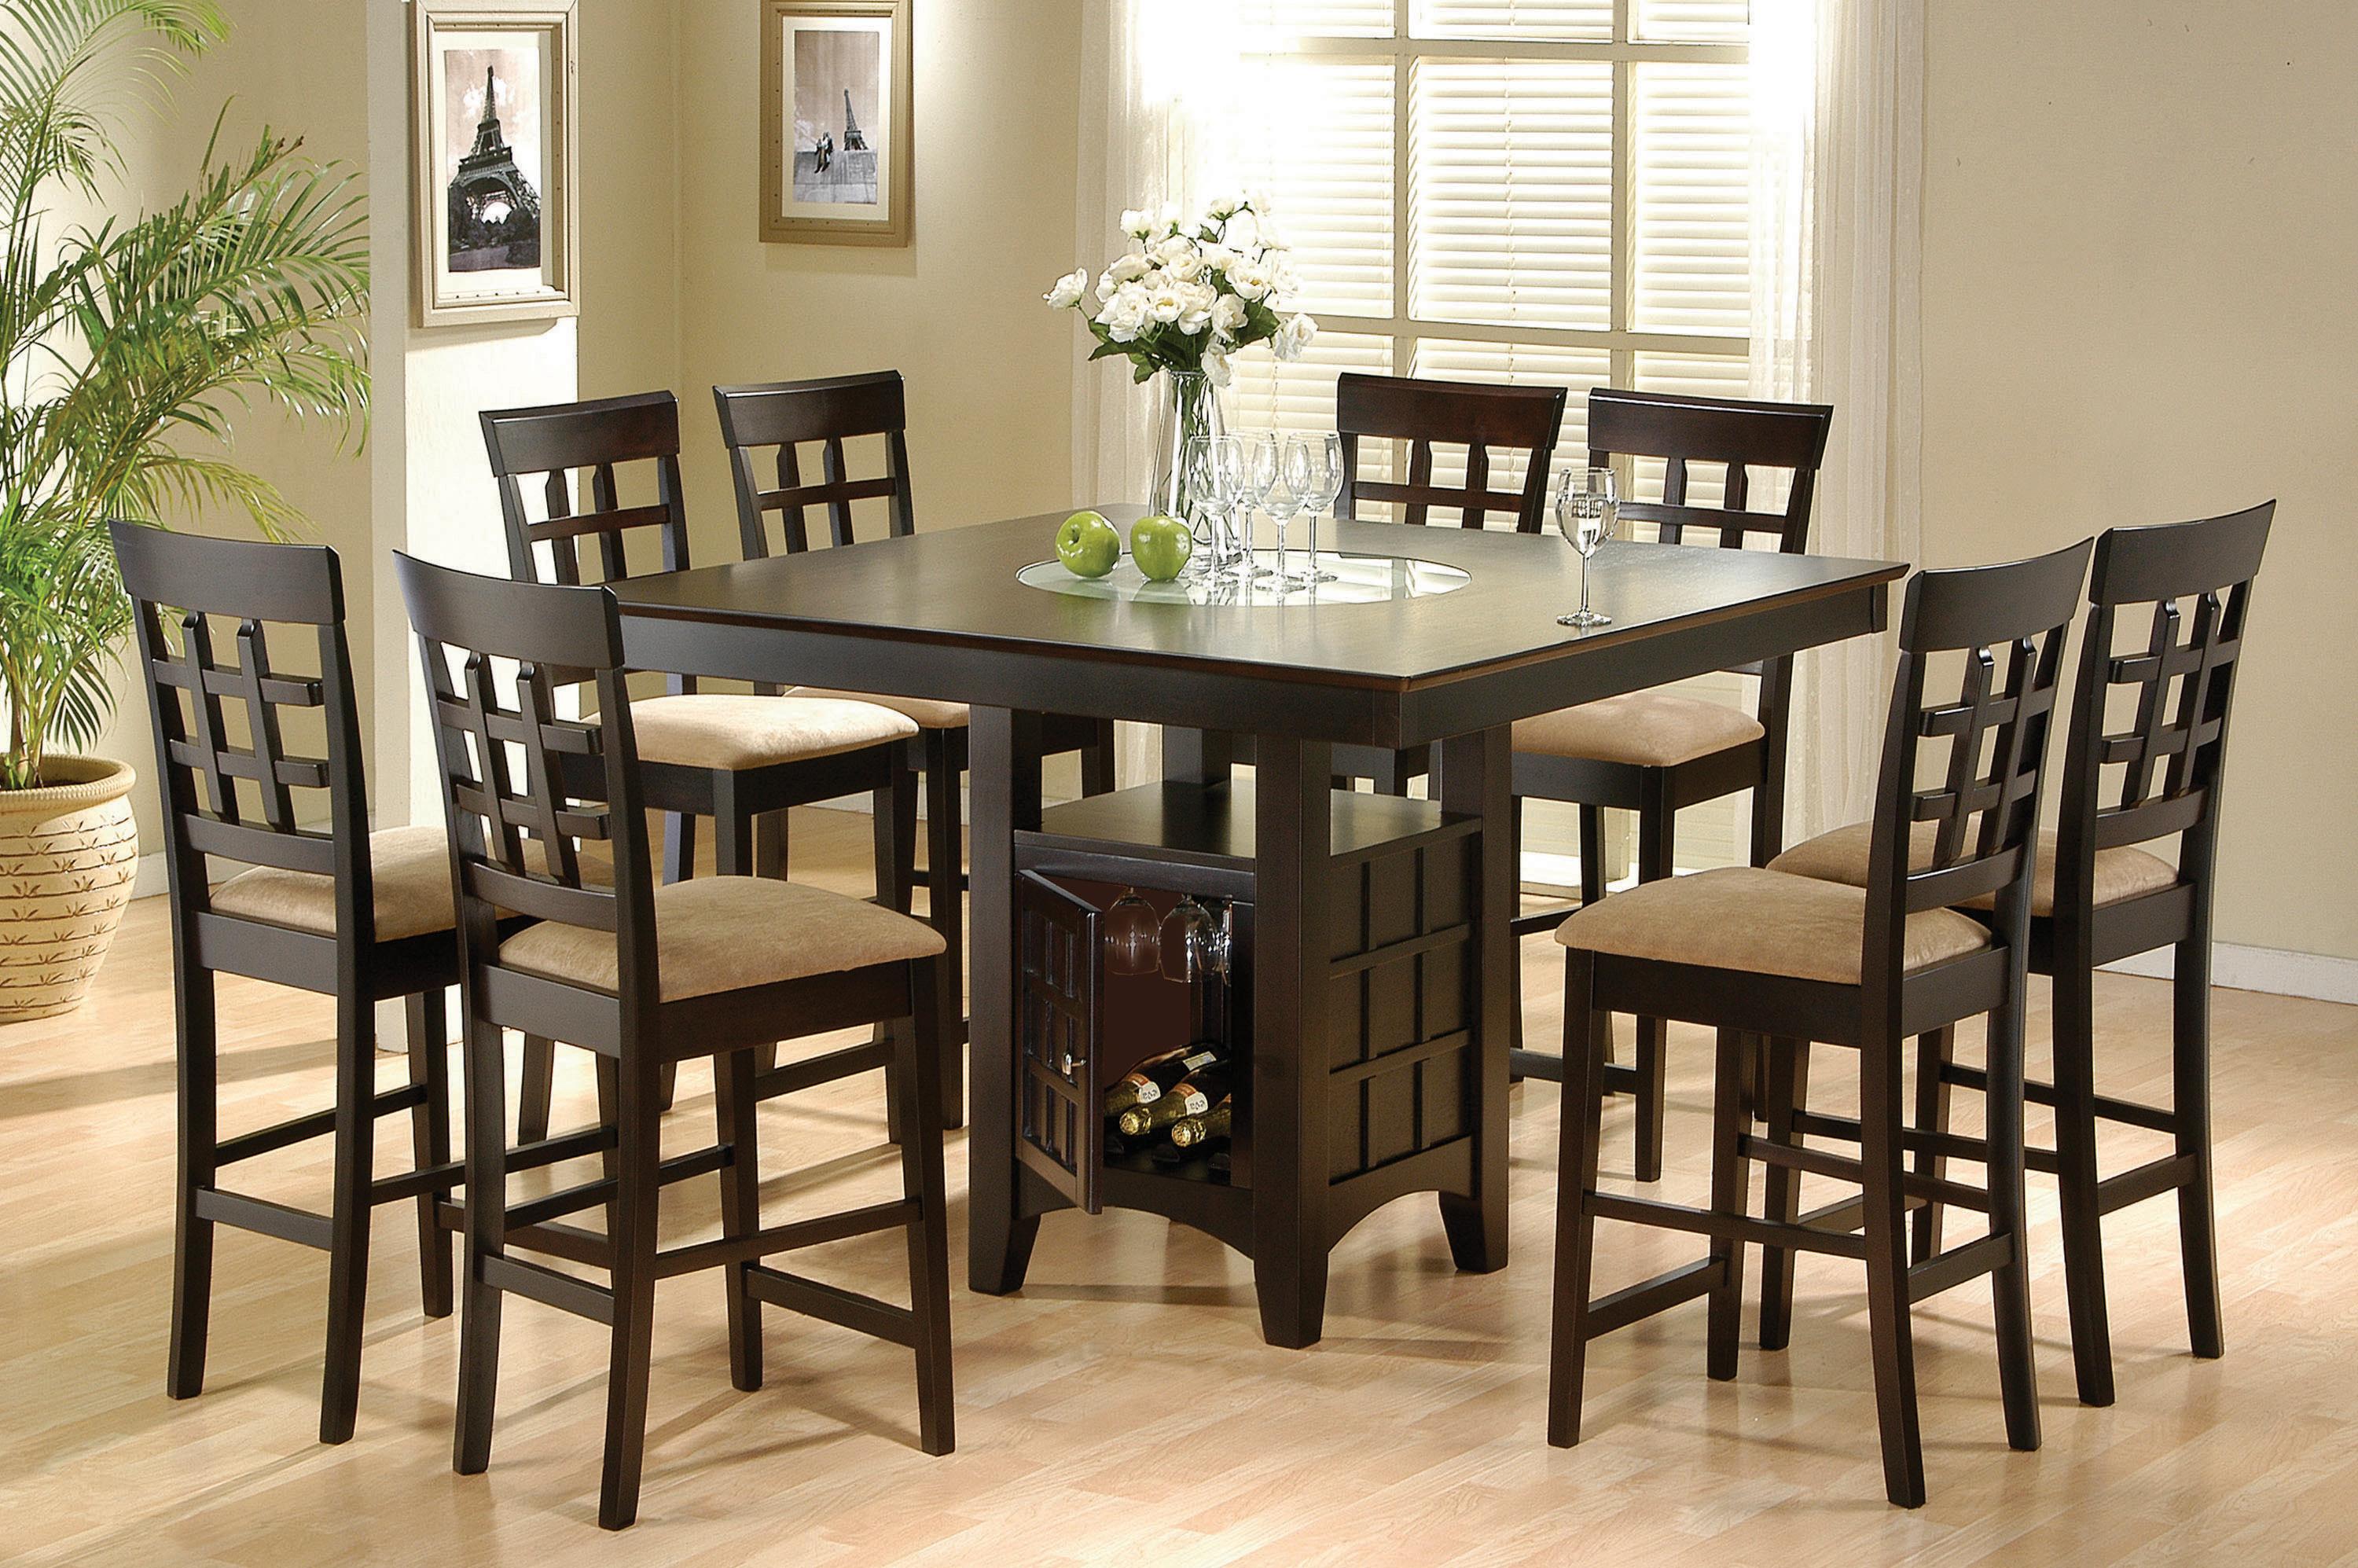 Transitional Dining Room Set 100438-S9 Clanton 100438-S9 in Cappuccino Fabric